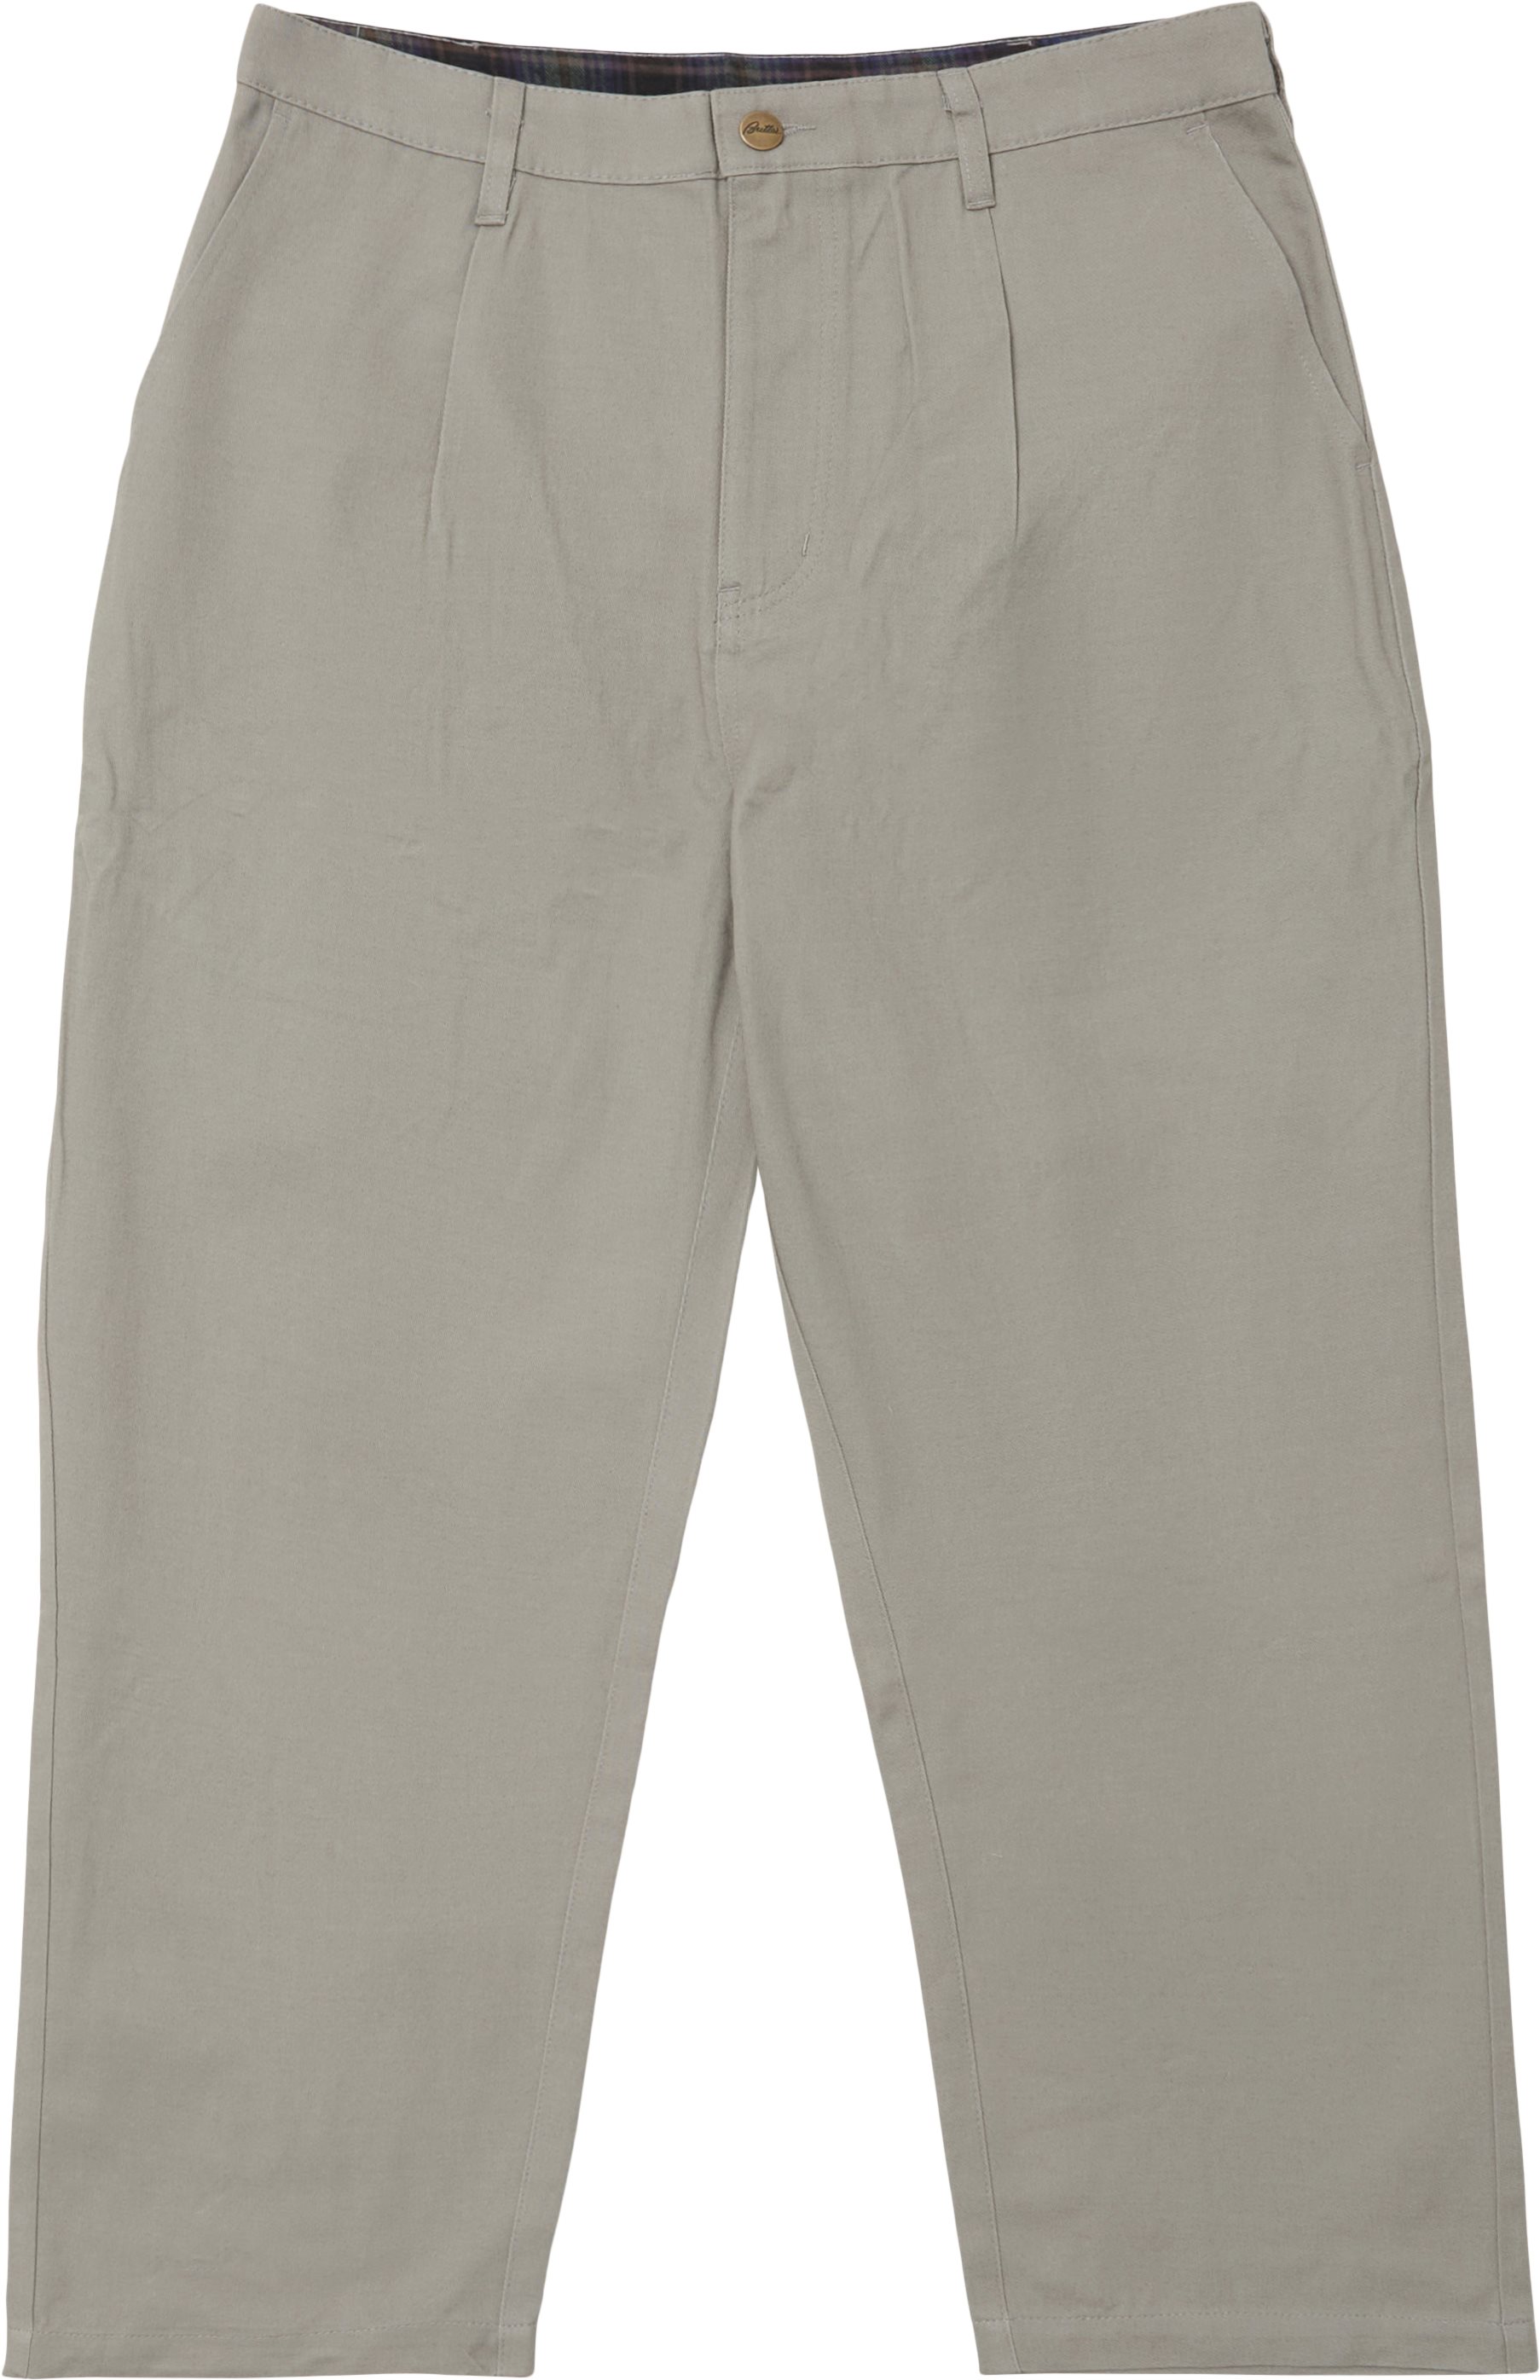 Campbell Pants - Trousers - Baggy fit - Grey